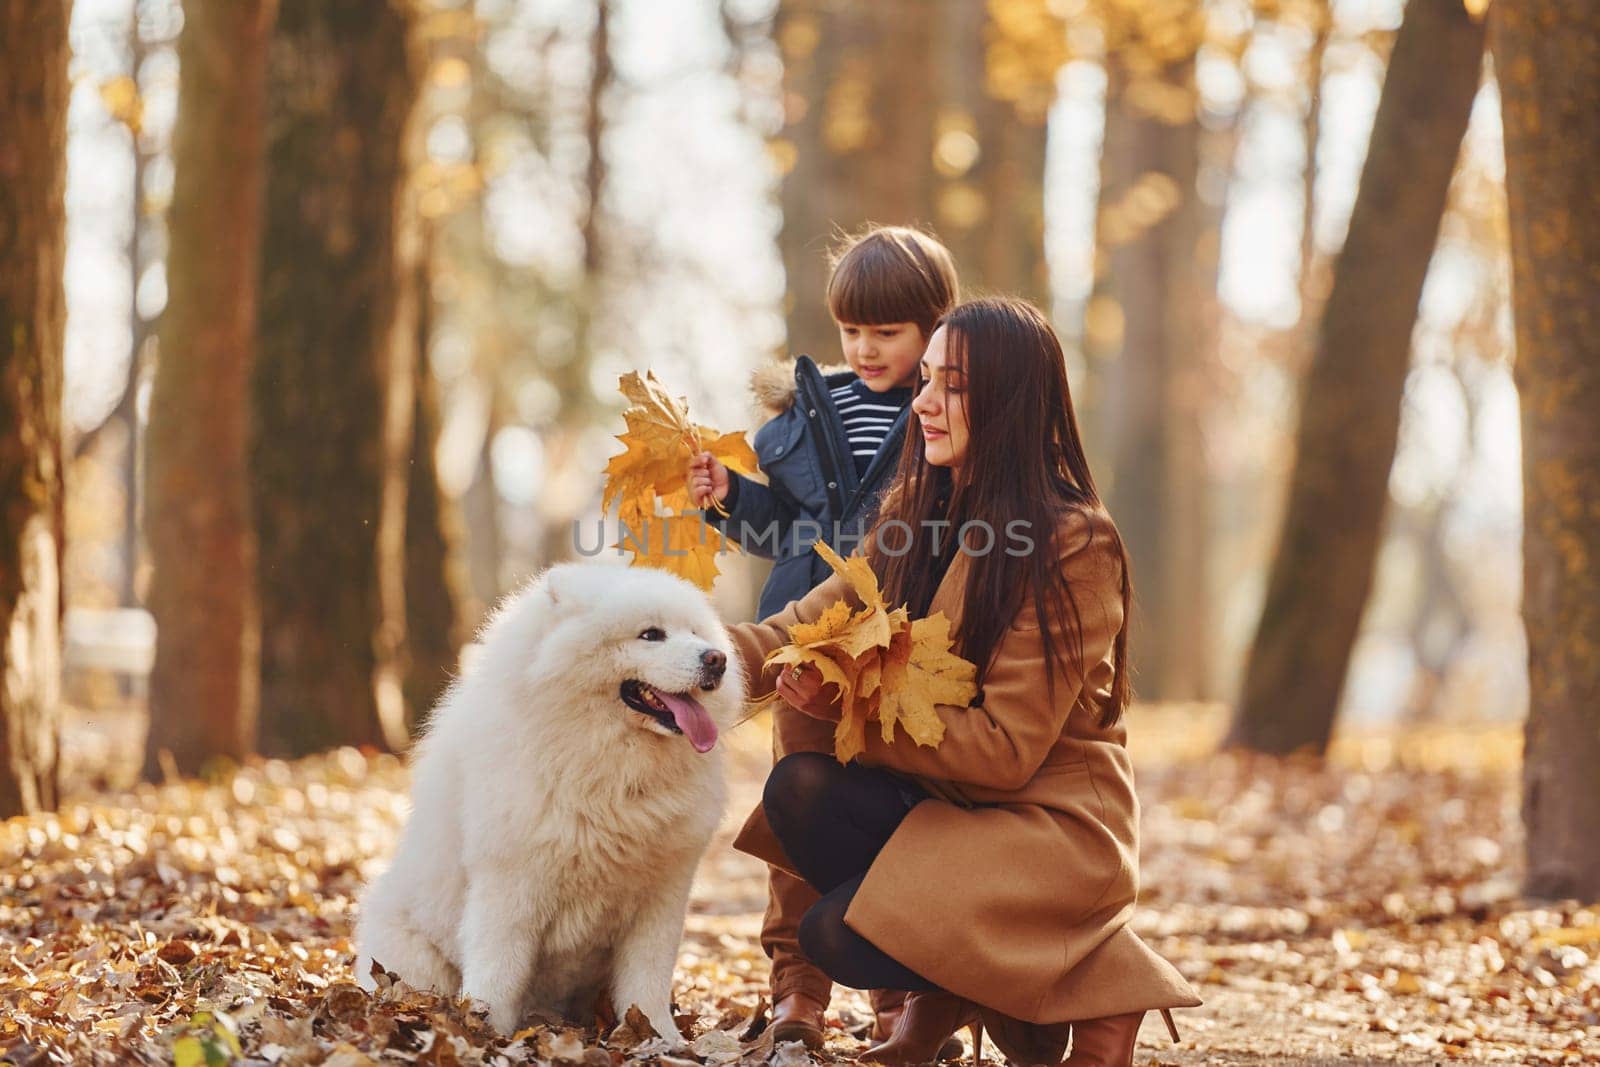 WIth cute dog. Mother with her son is having fun outdoors in the autumn forest by Standret